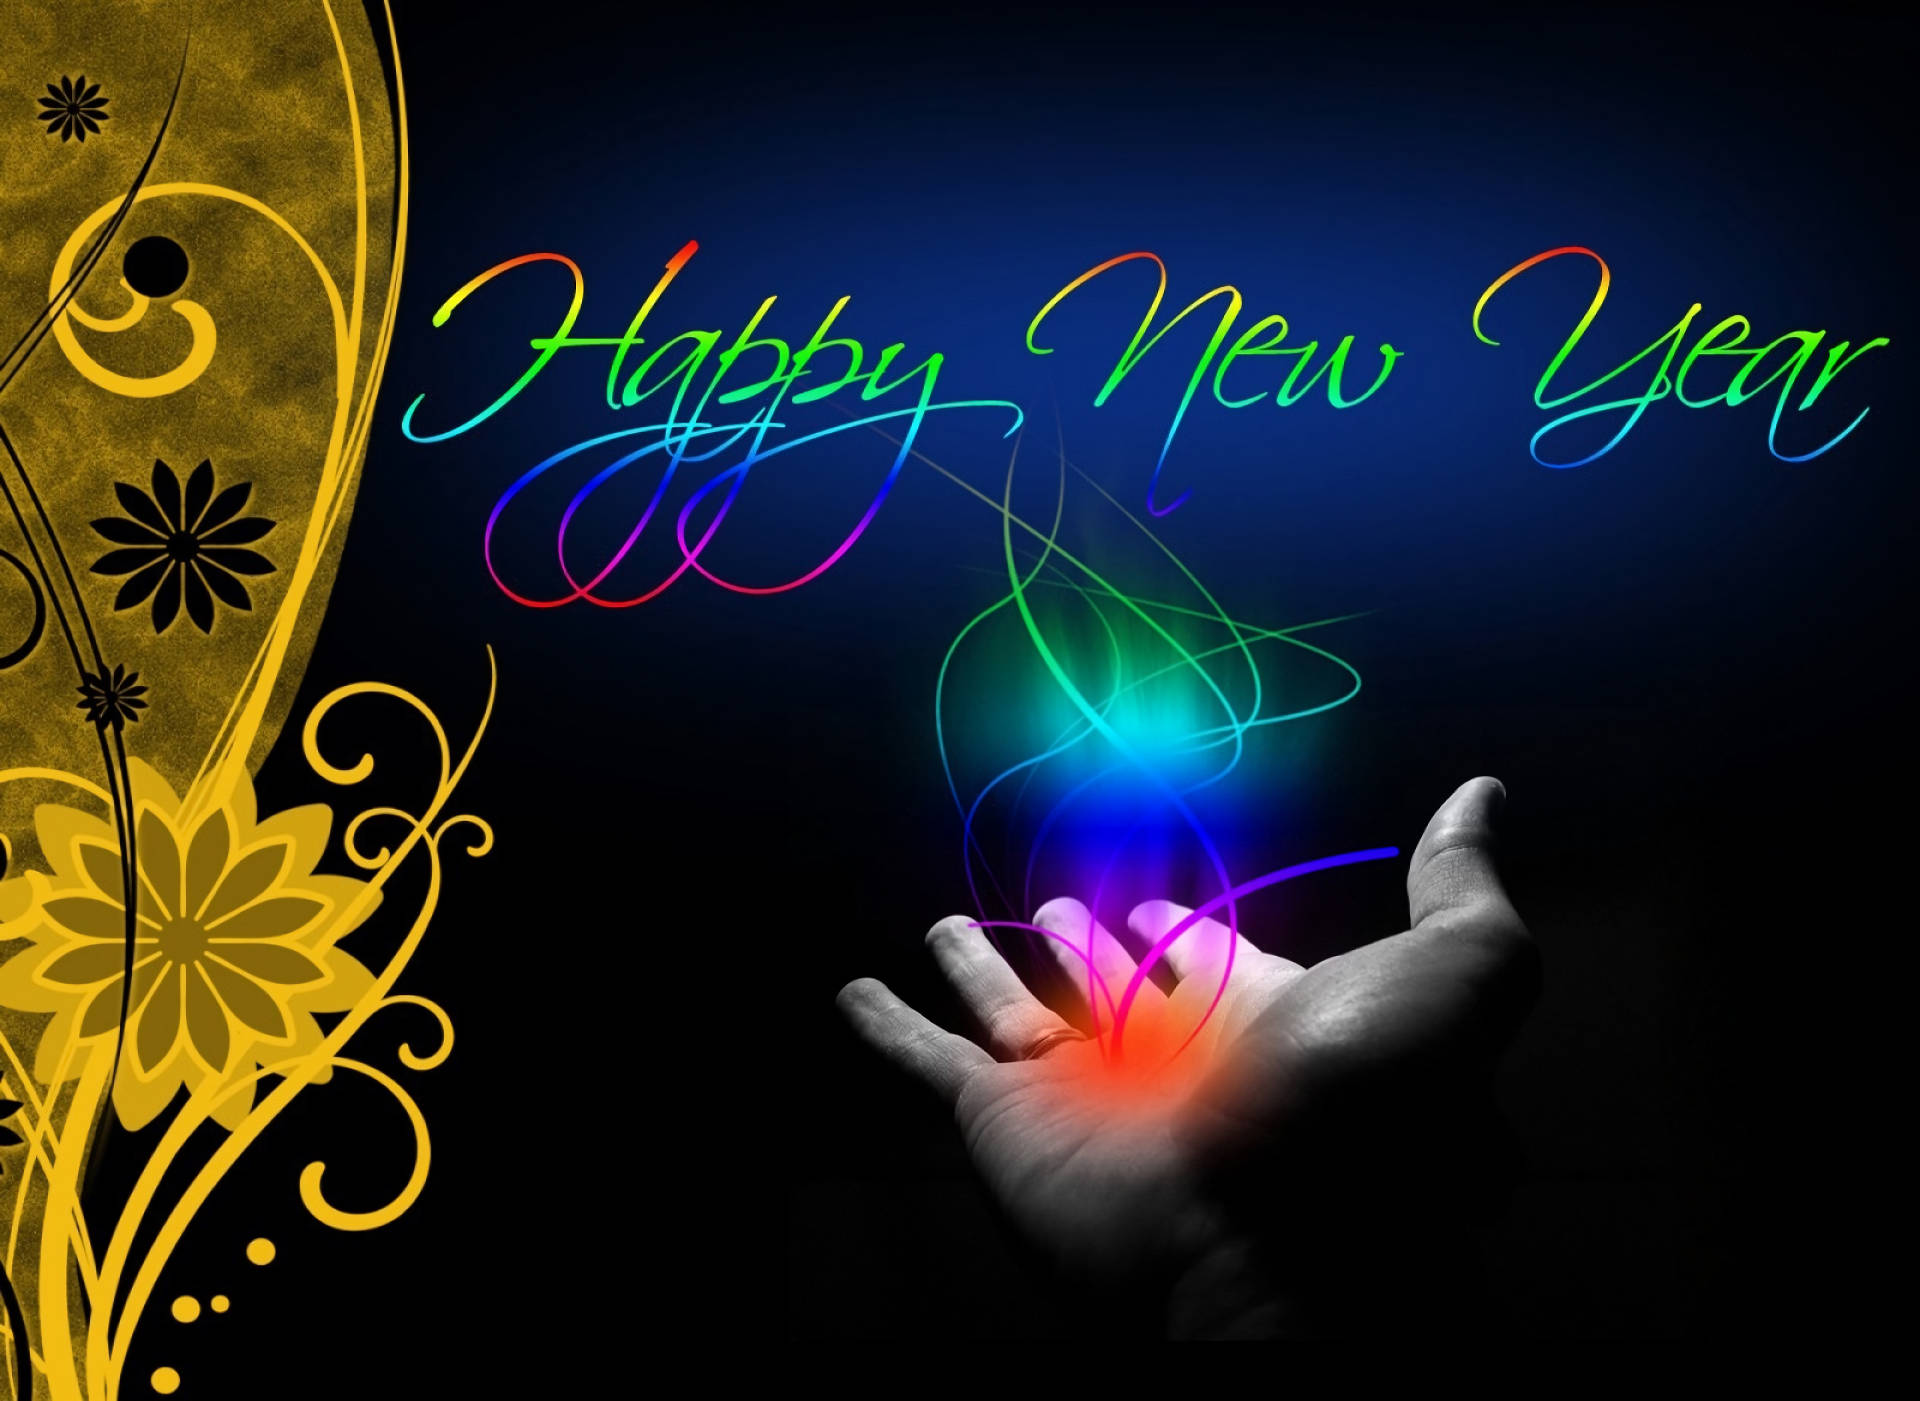 New Year Greetings And Hand Background